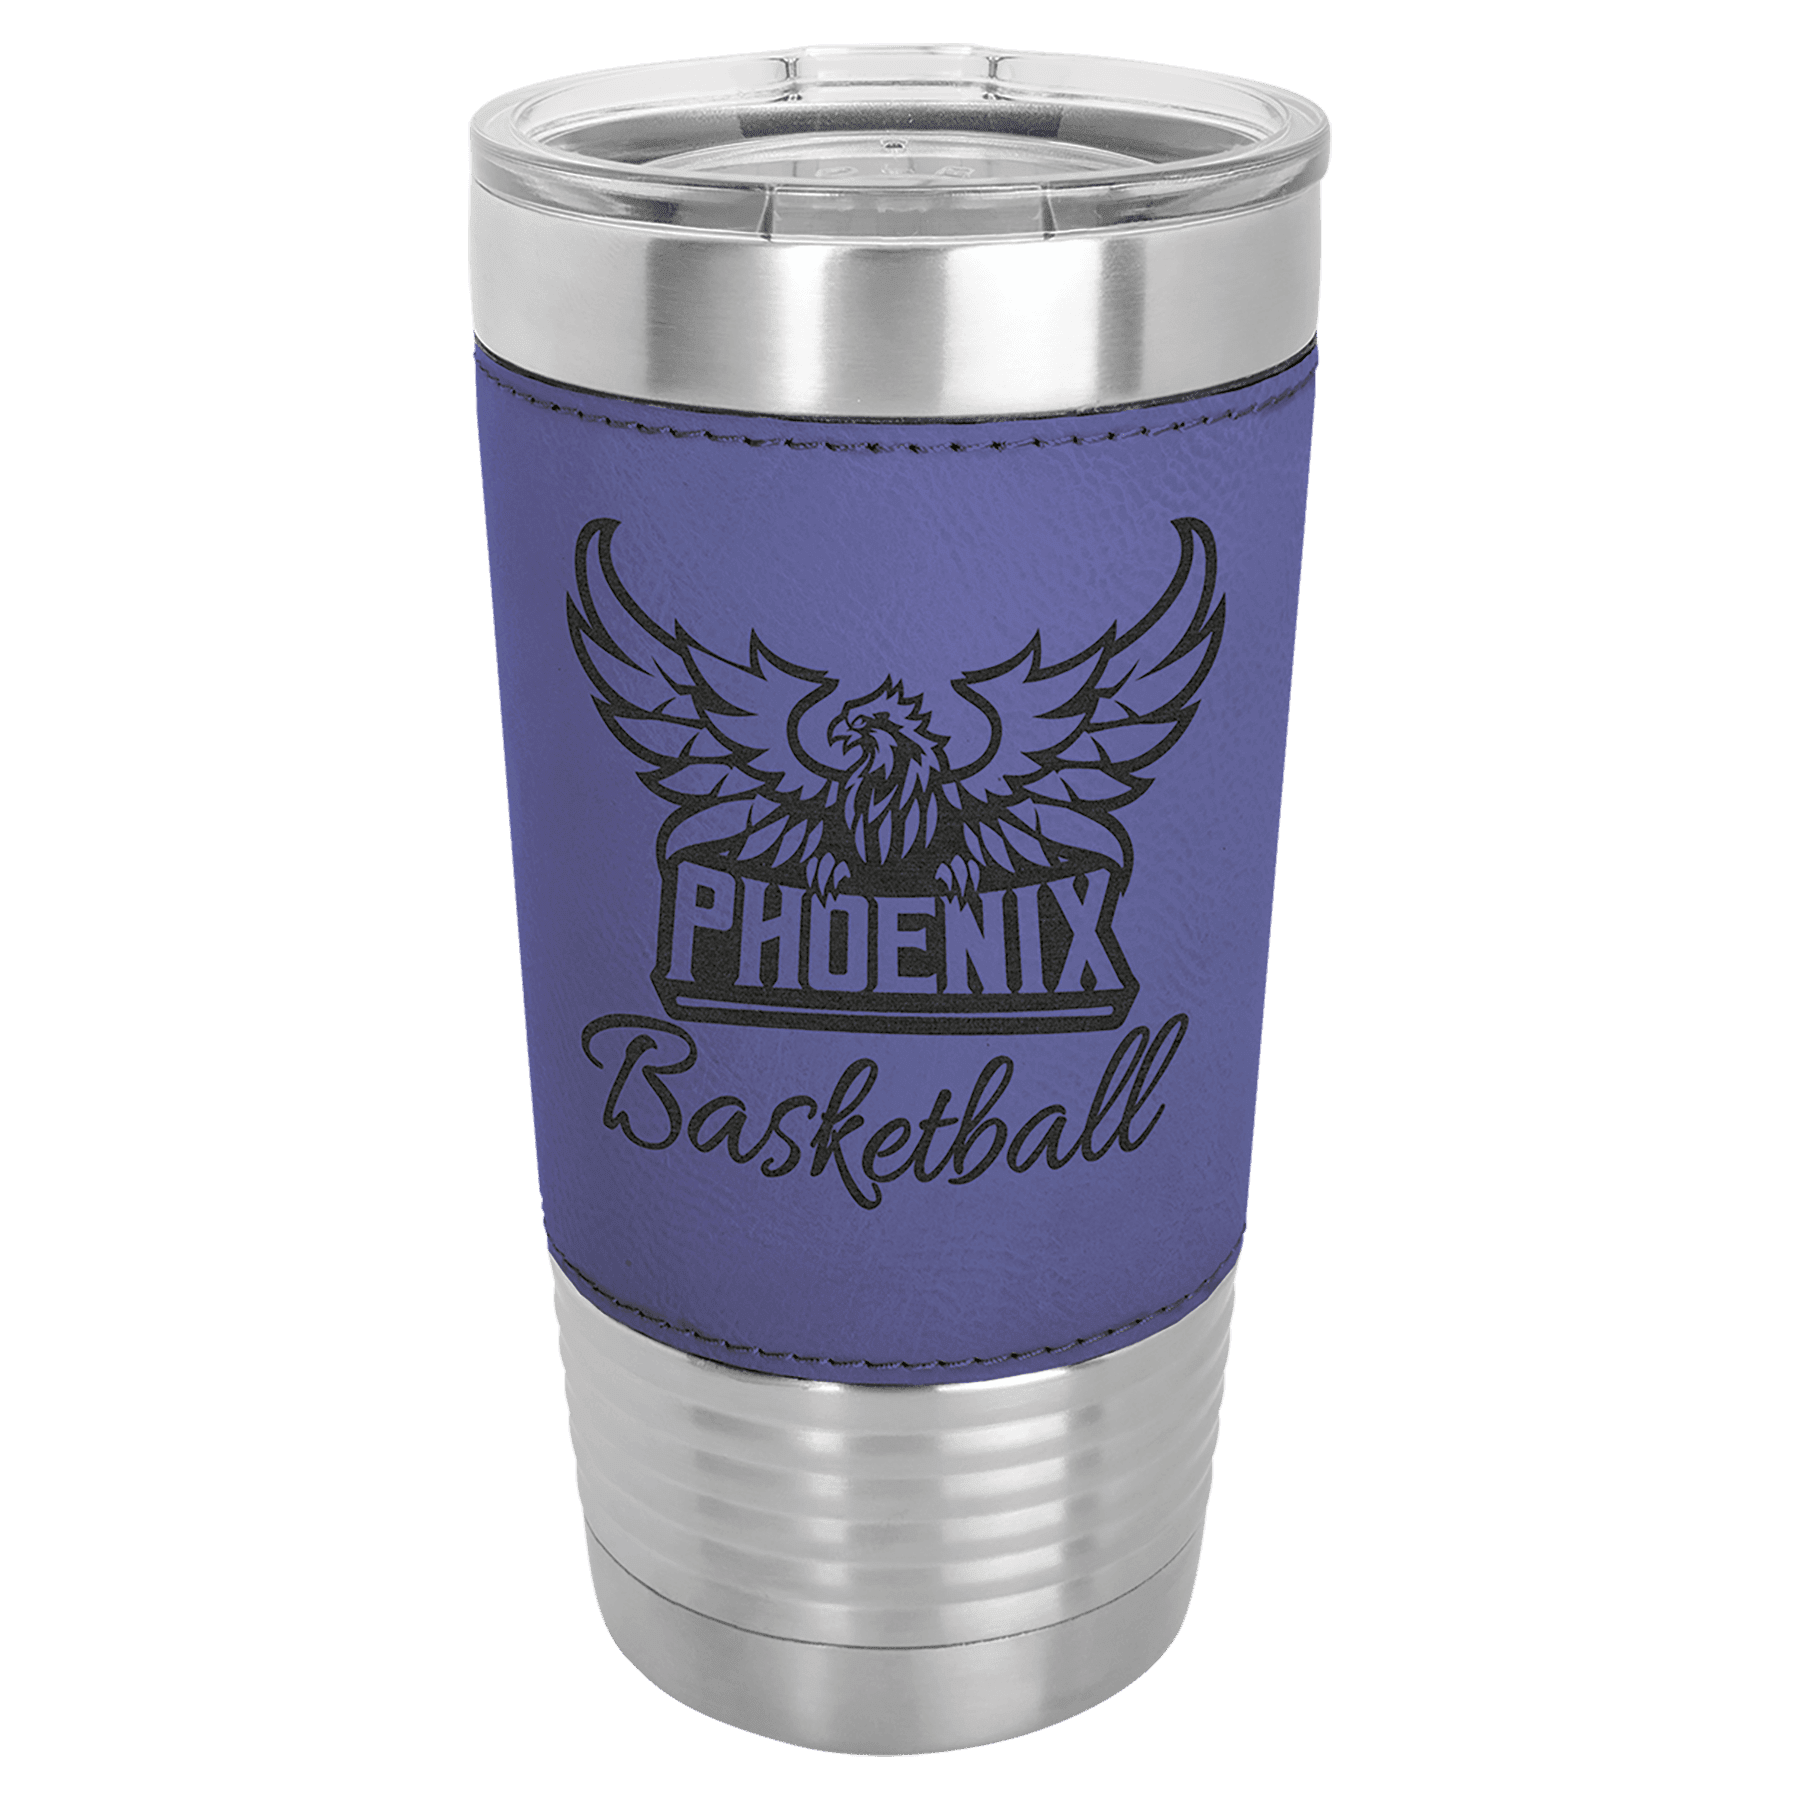 20 oz Vacuum Insulated Tumbler with Leatherette Grip and "Free Engraving"